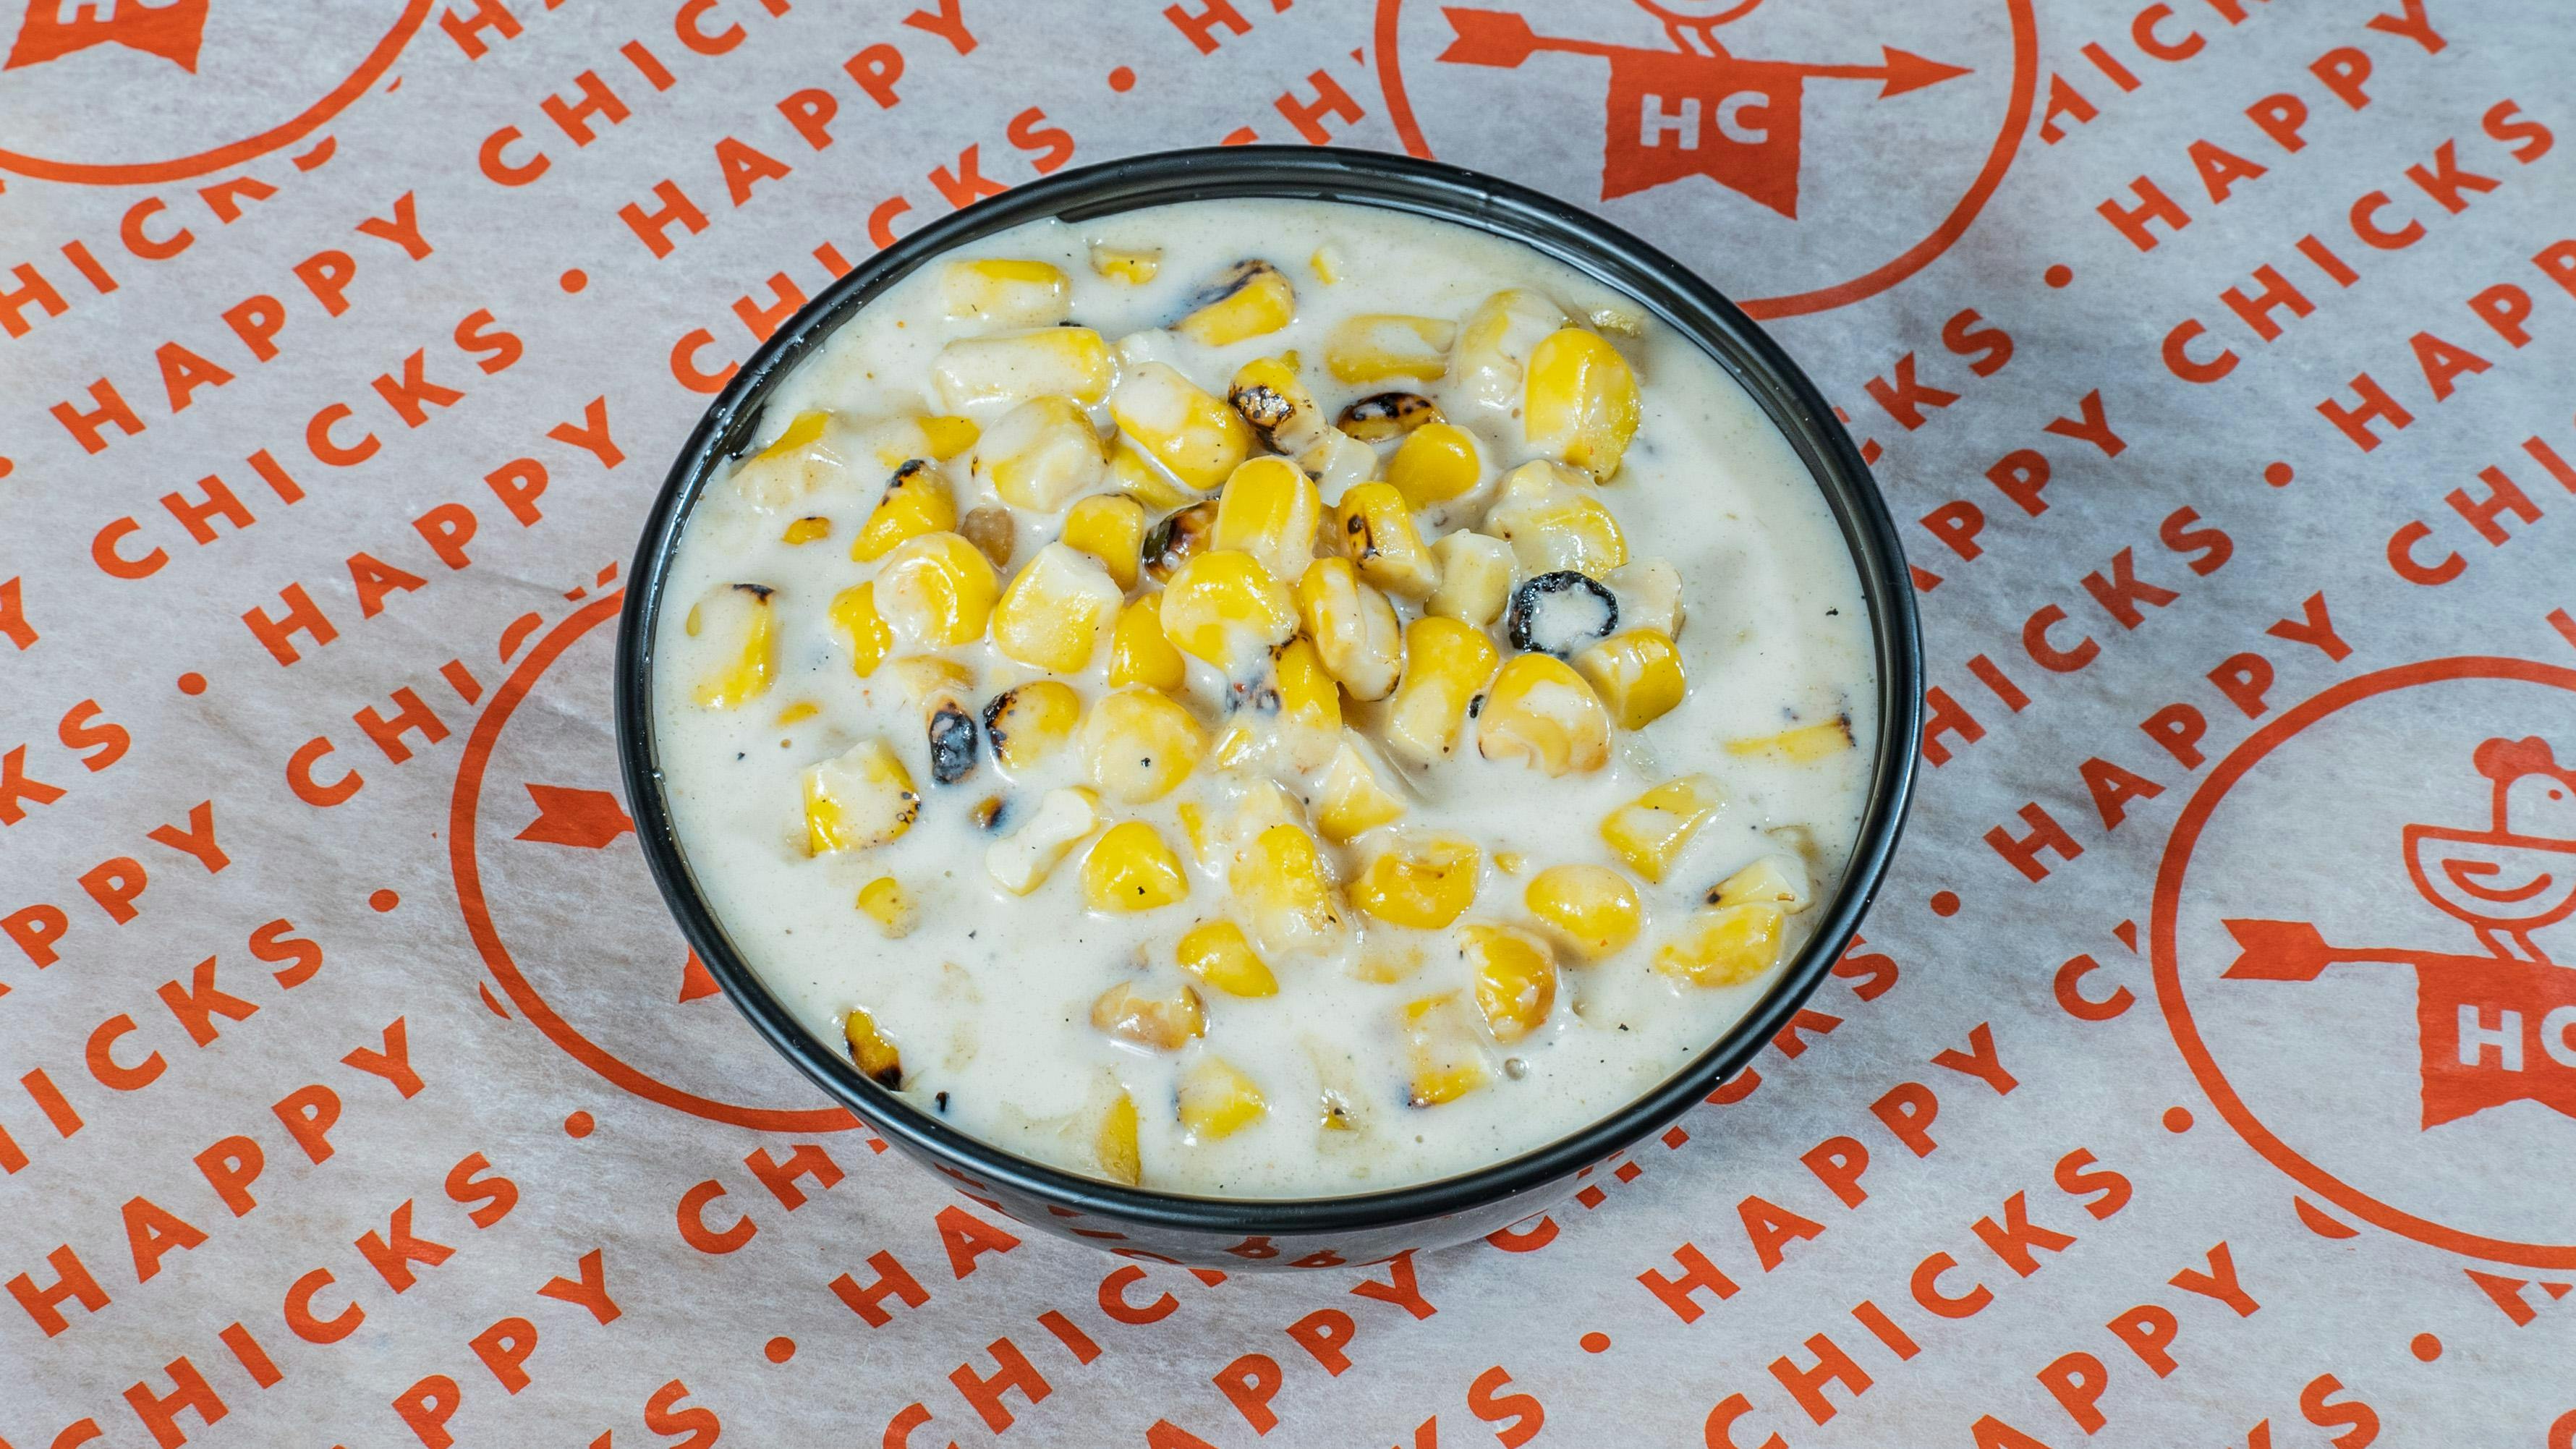 Fire Roasted Cream Corn from Happy Chicks - Research Blvd in Austin, TX